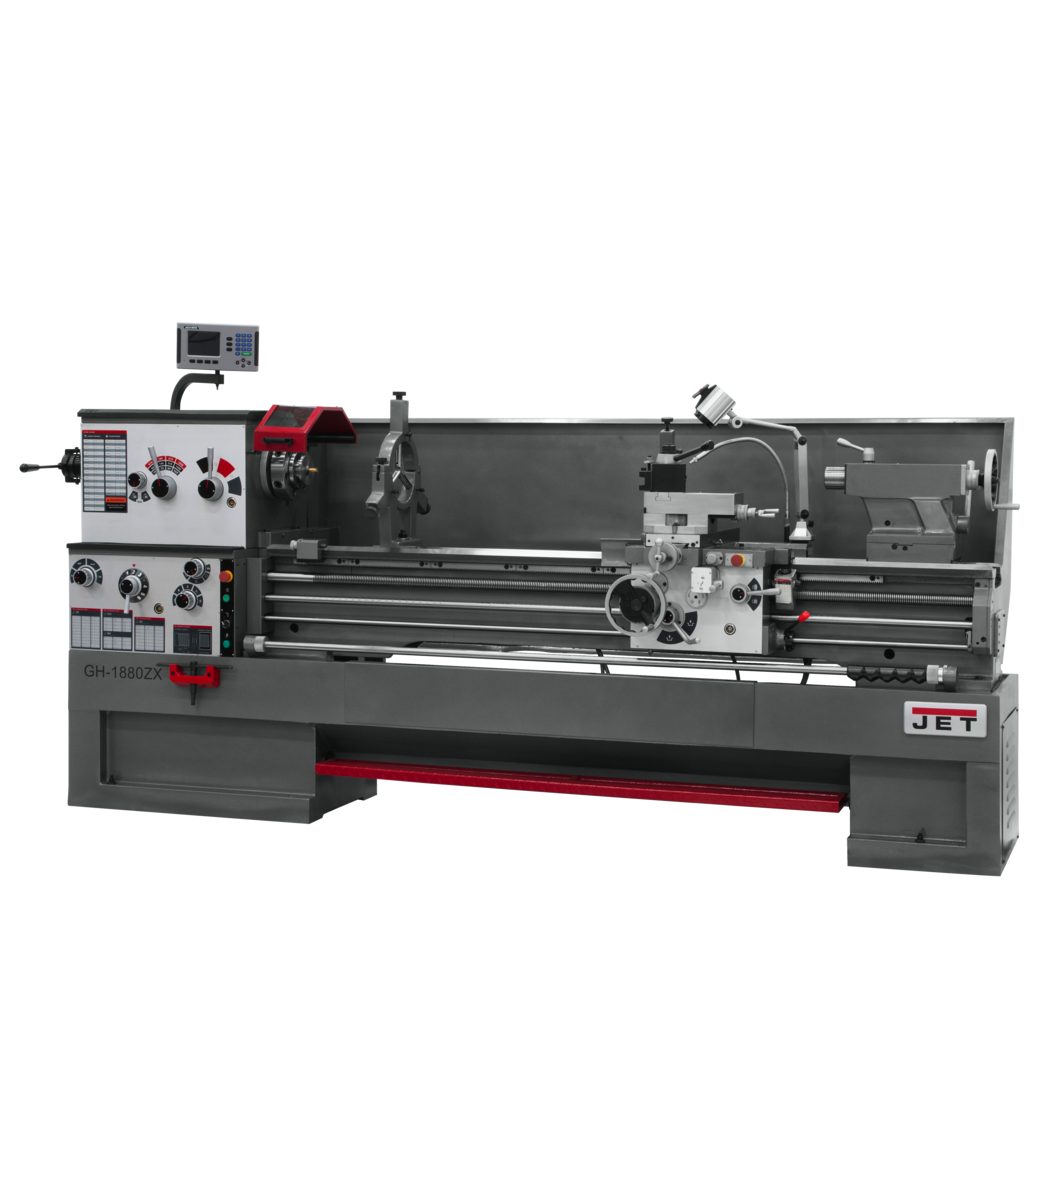 321599, GH-1880ZX , 18" Swing, 80" Between Centers, GH-1880ZX With ACU-RITE 303 DRO With Taper Attachment and Collet Closer installed, Jet, Metalworking, Turning, Lathes